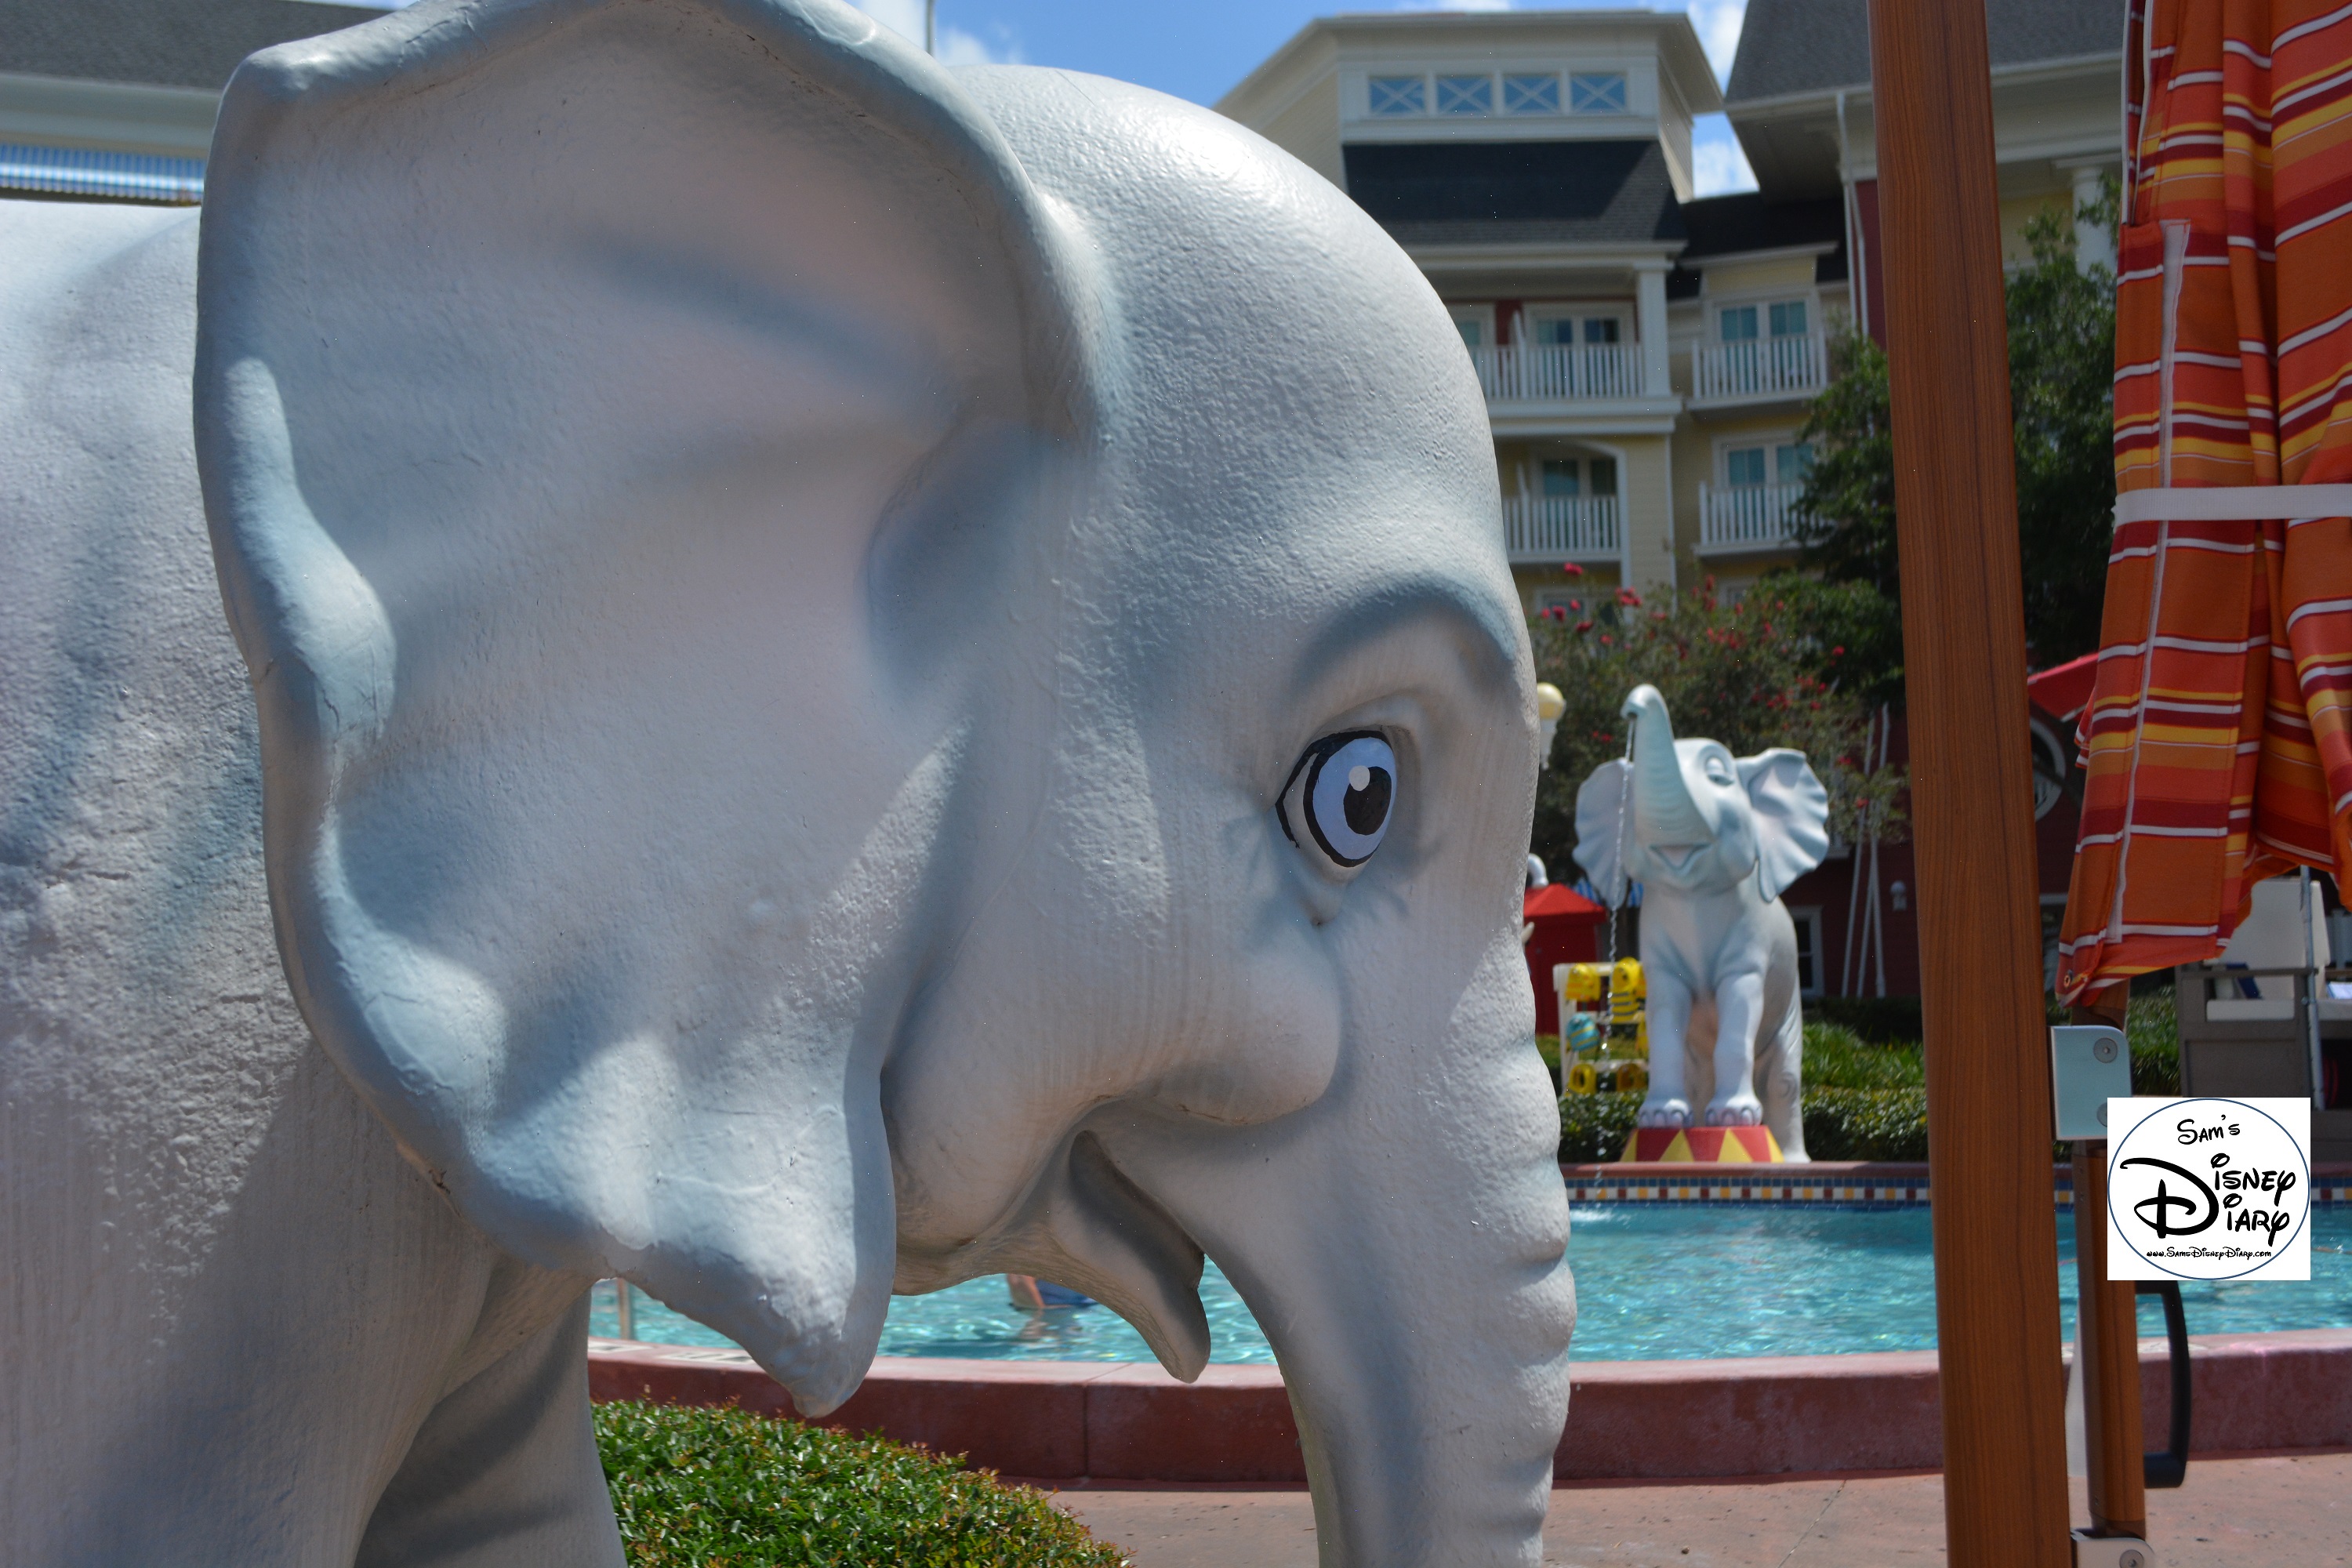 Elephants at the Pool? Why?